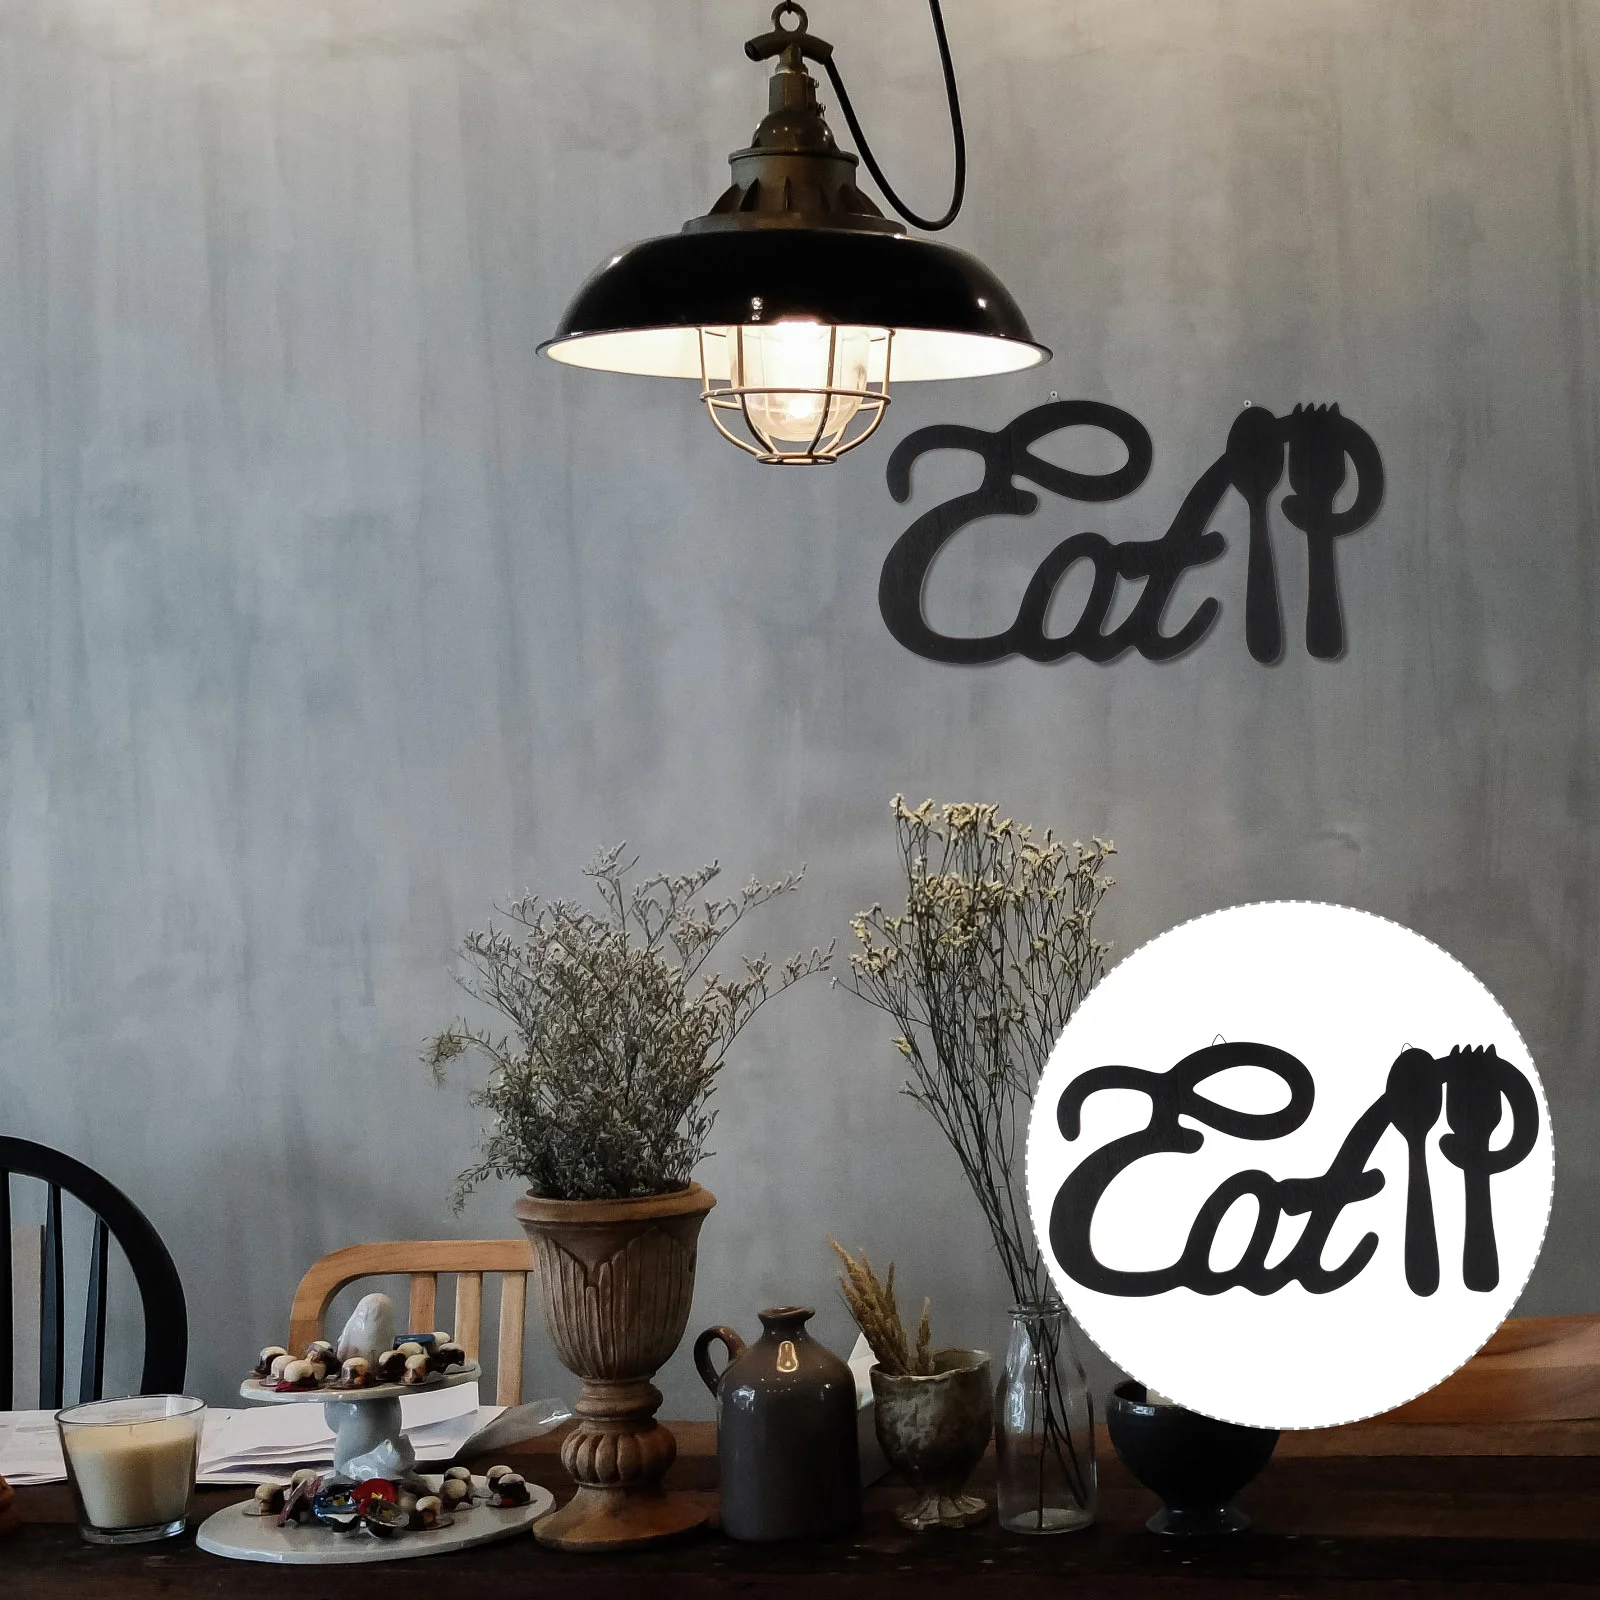 

Wall Decor Kitchen Sign Hanging Eat Farmhouse Rustic Decoration Room Large Spoon Fork Dining Letter Wood Wooden Signs Cute